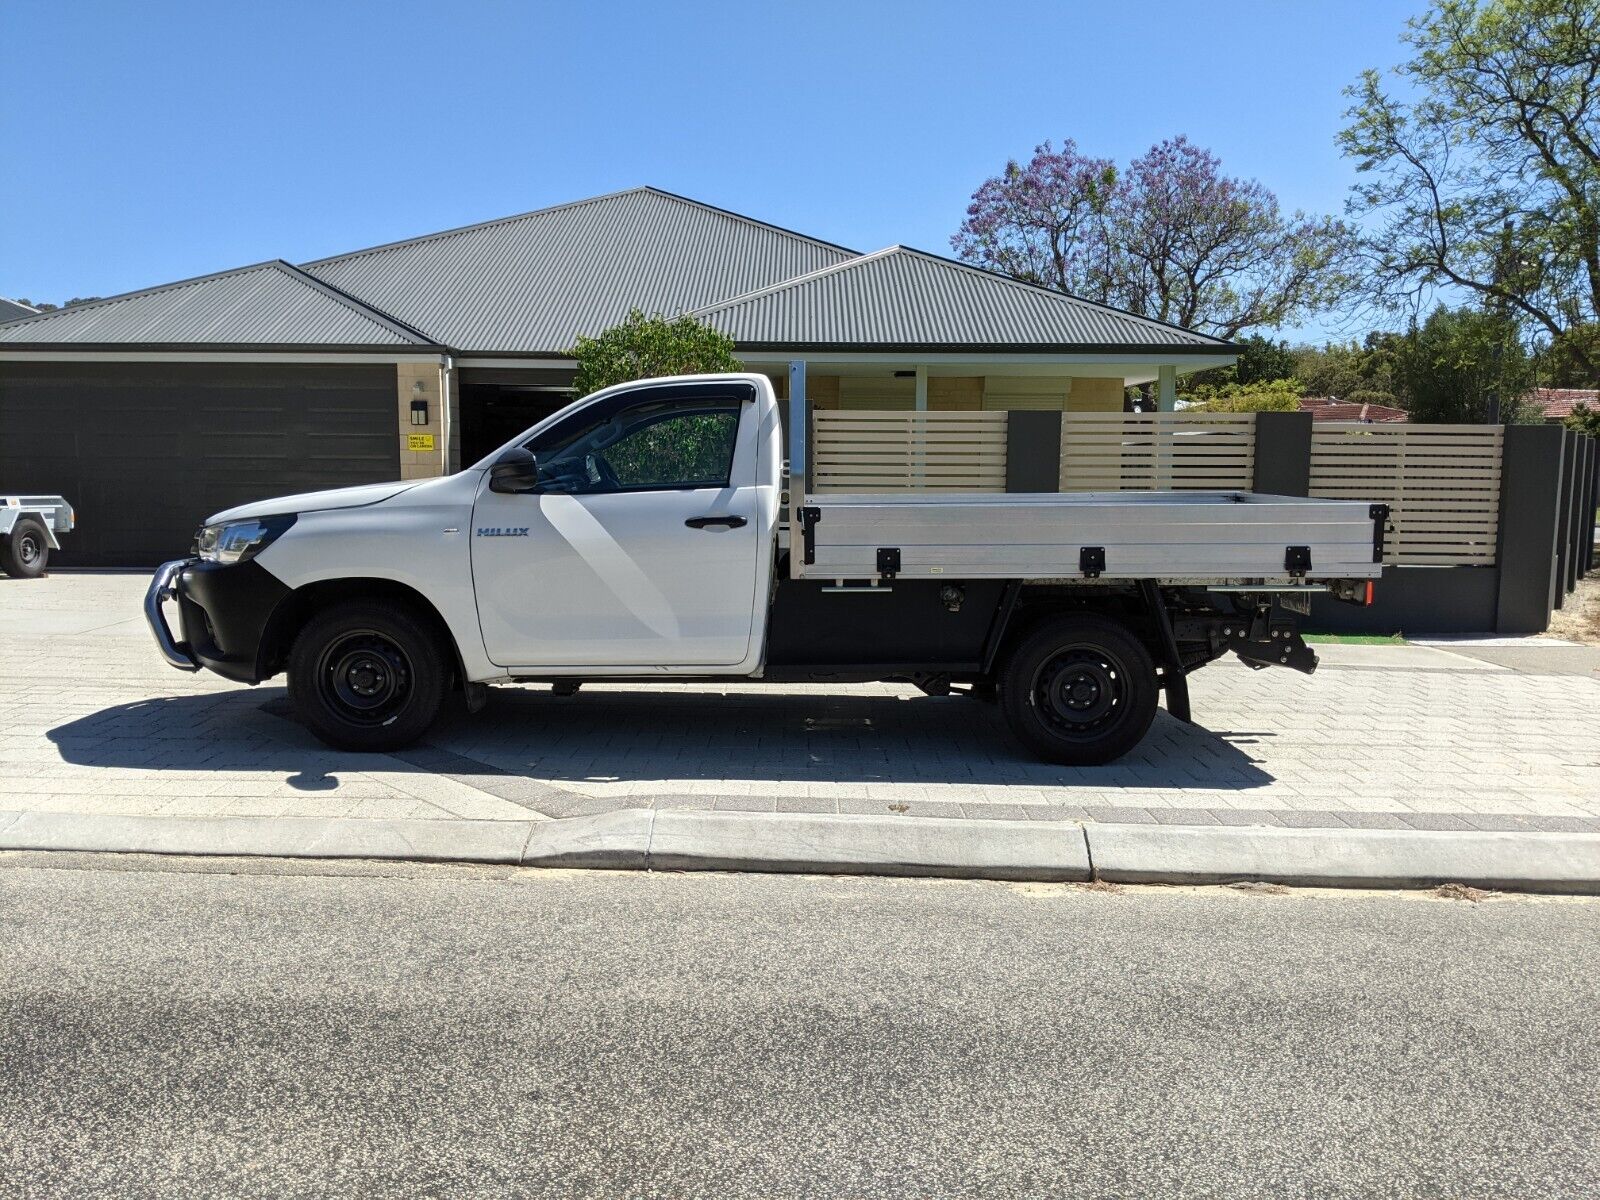 Toyota Hilux Workmate 2018